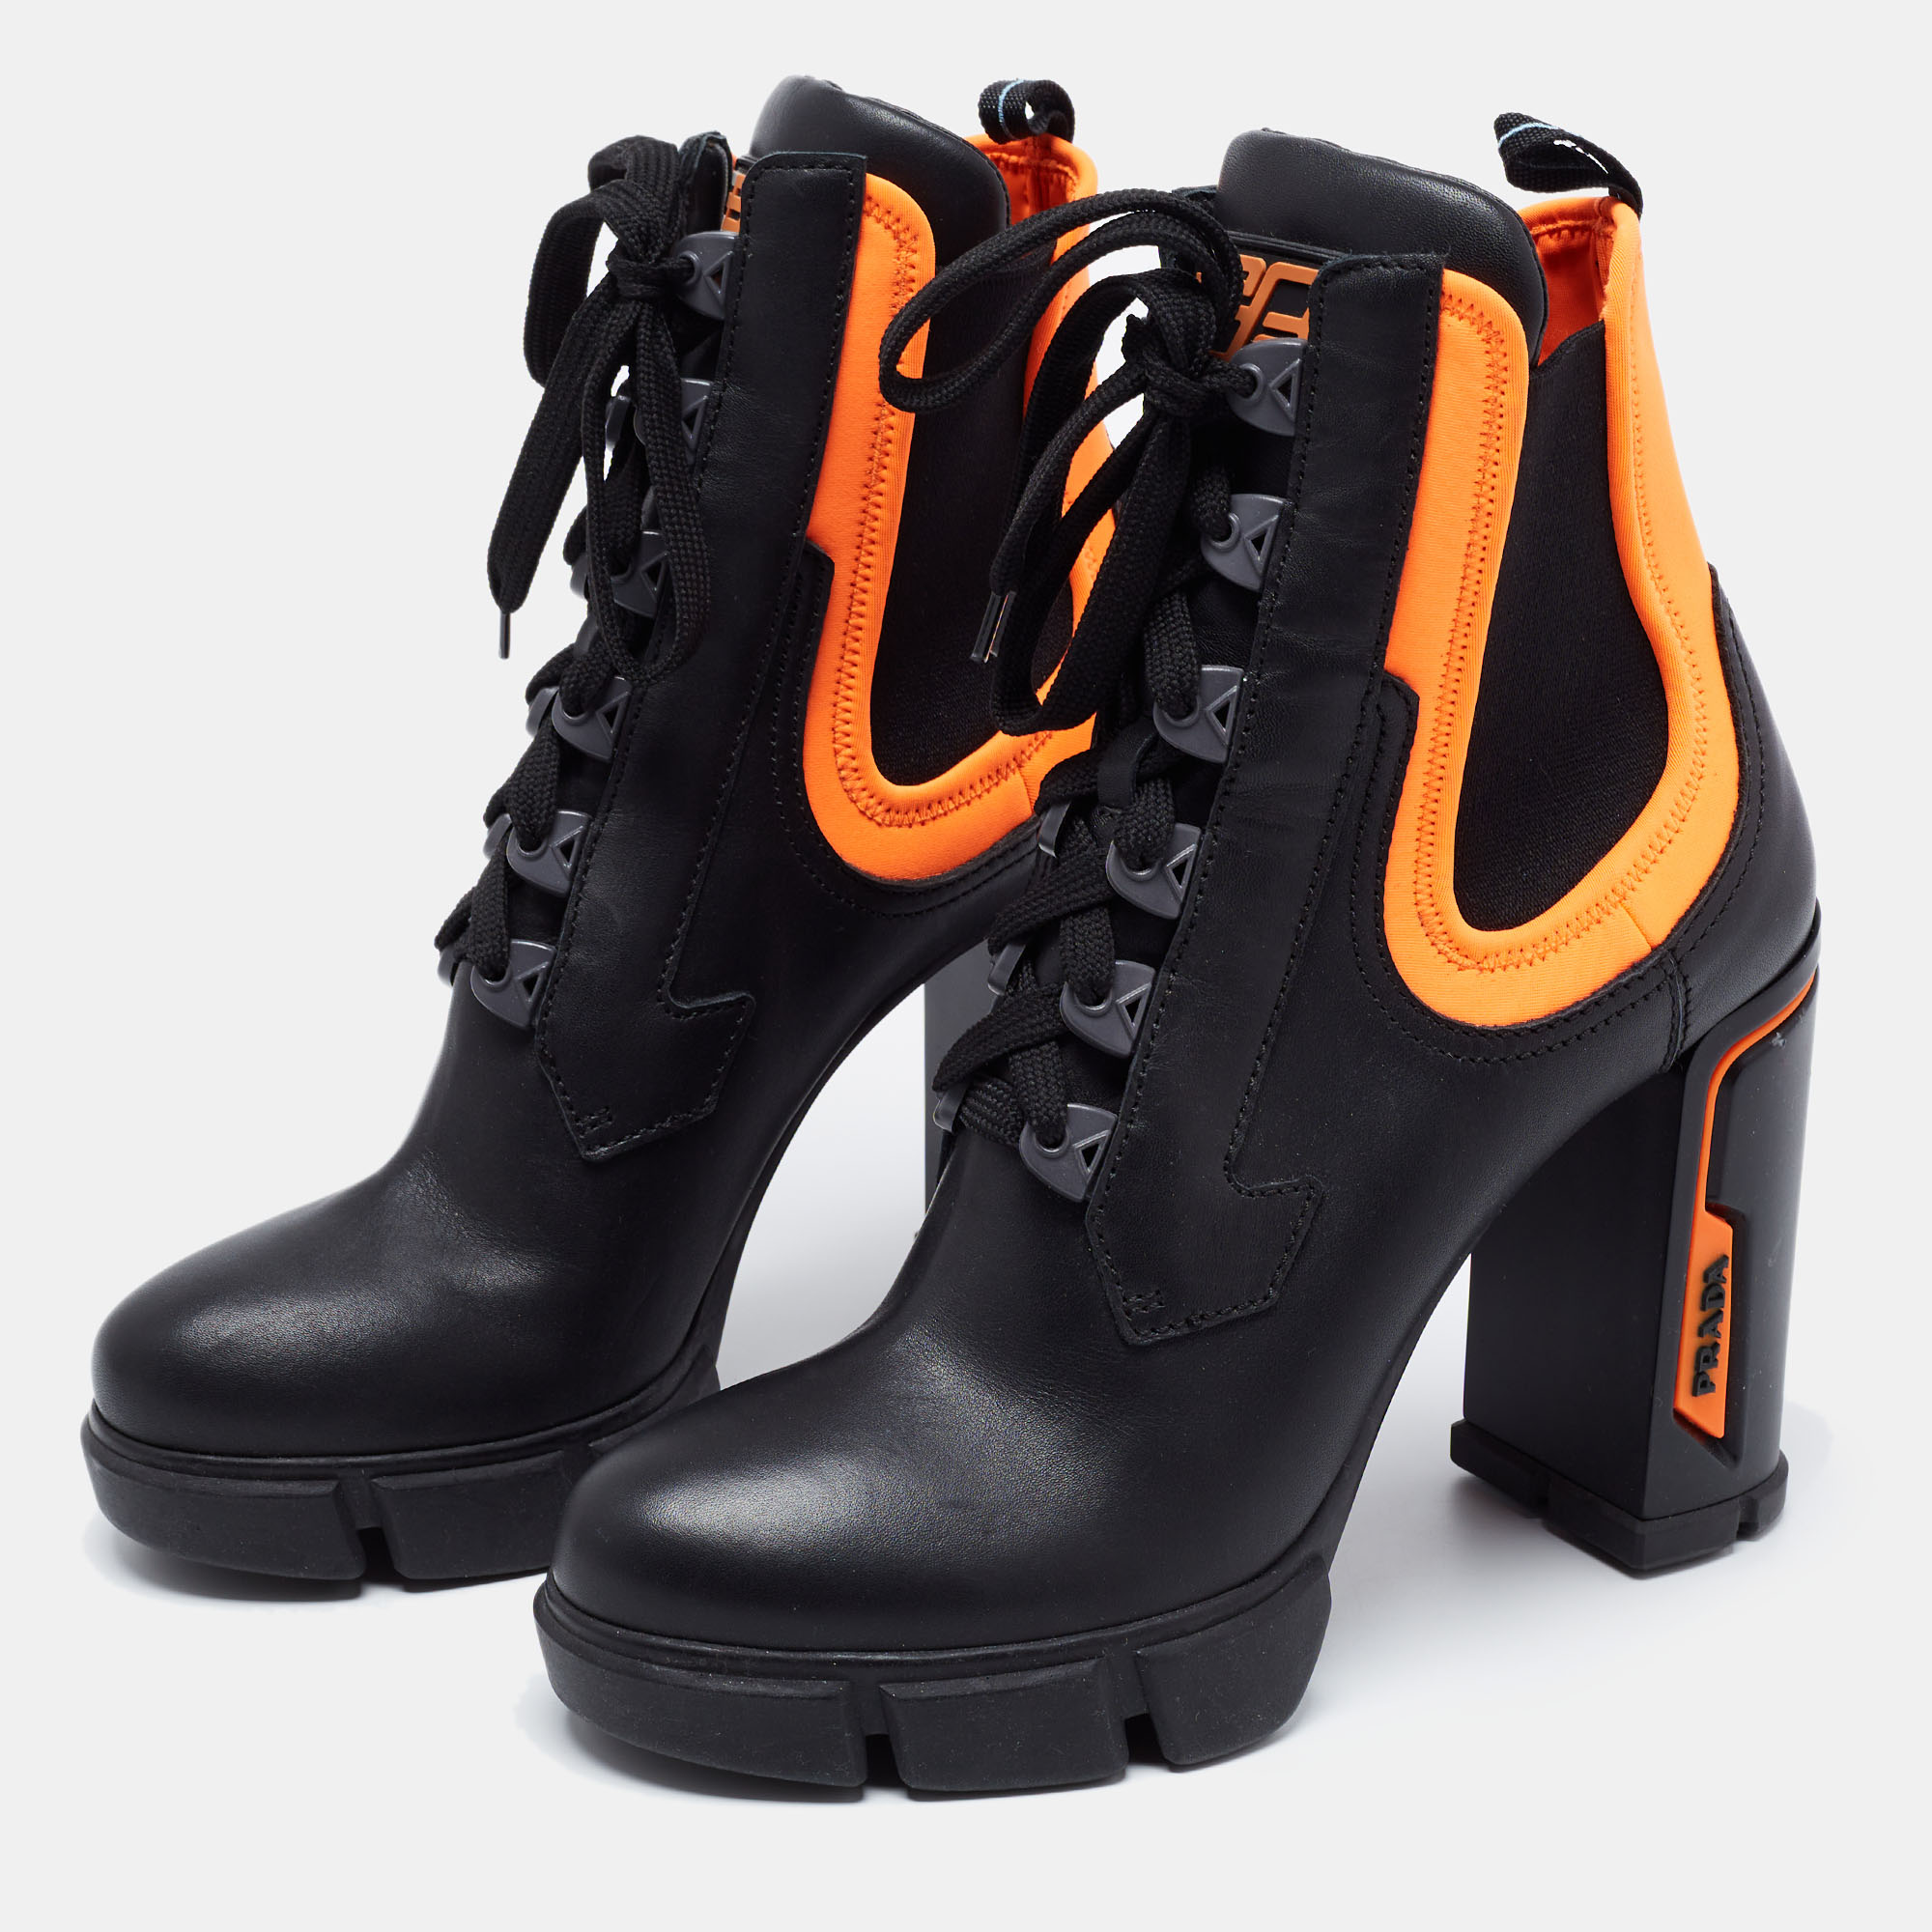 

Prada Black/Orange Leather and Neoprene Neon Detail Lace up Ankle Boots Size